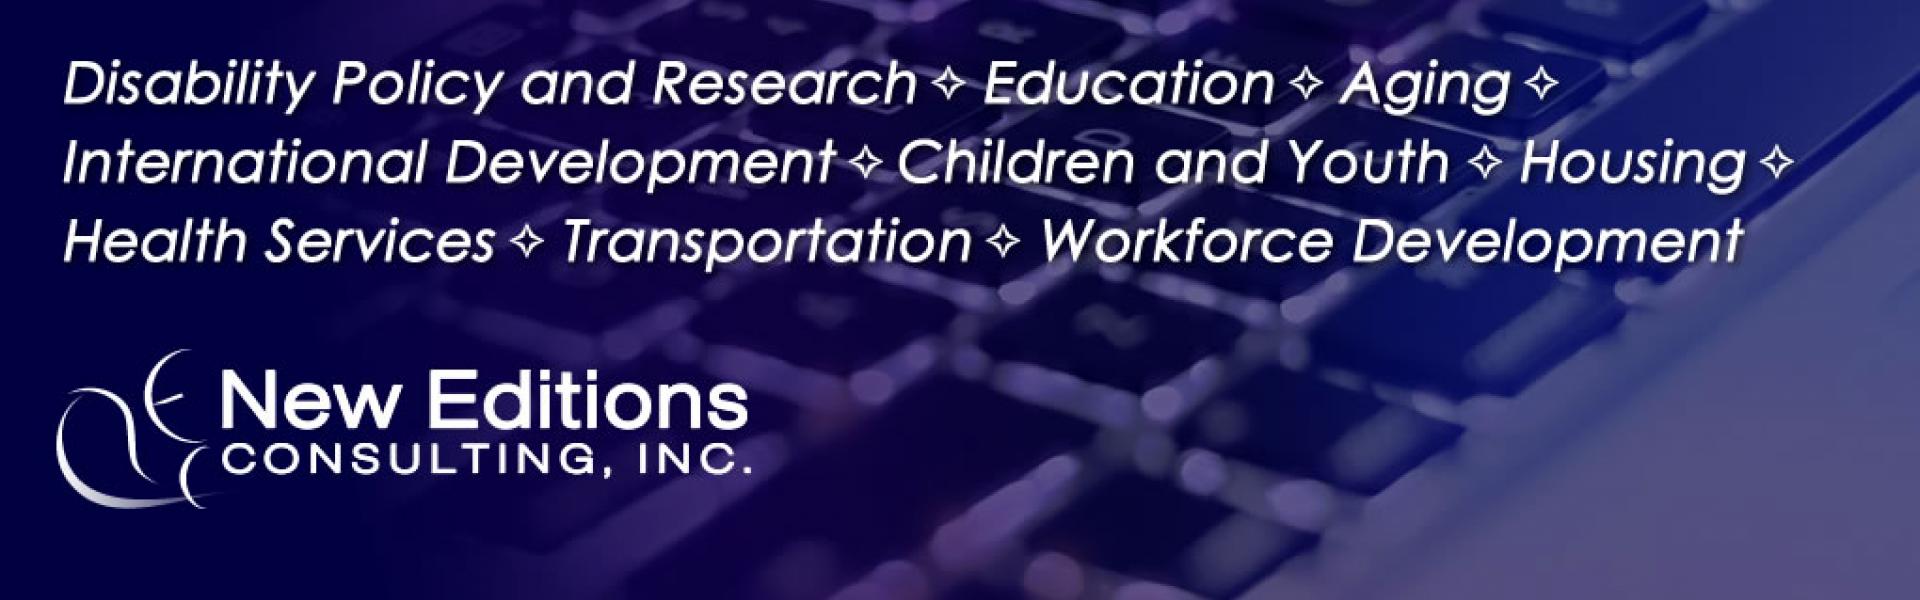 Disability Policy and Research, Education, Aging, International Development, Children and Youth, Health Services, Housing, Transportation, Workforce Development